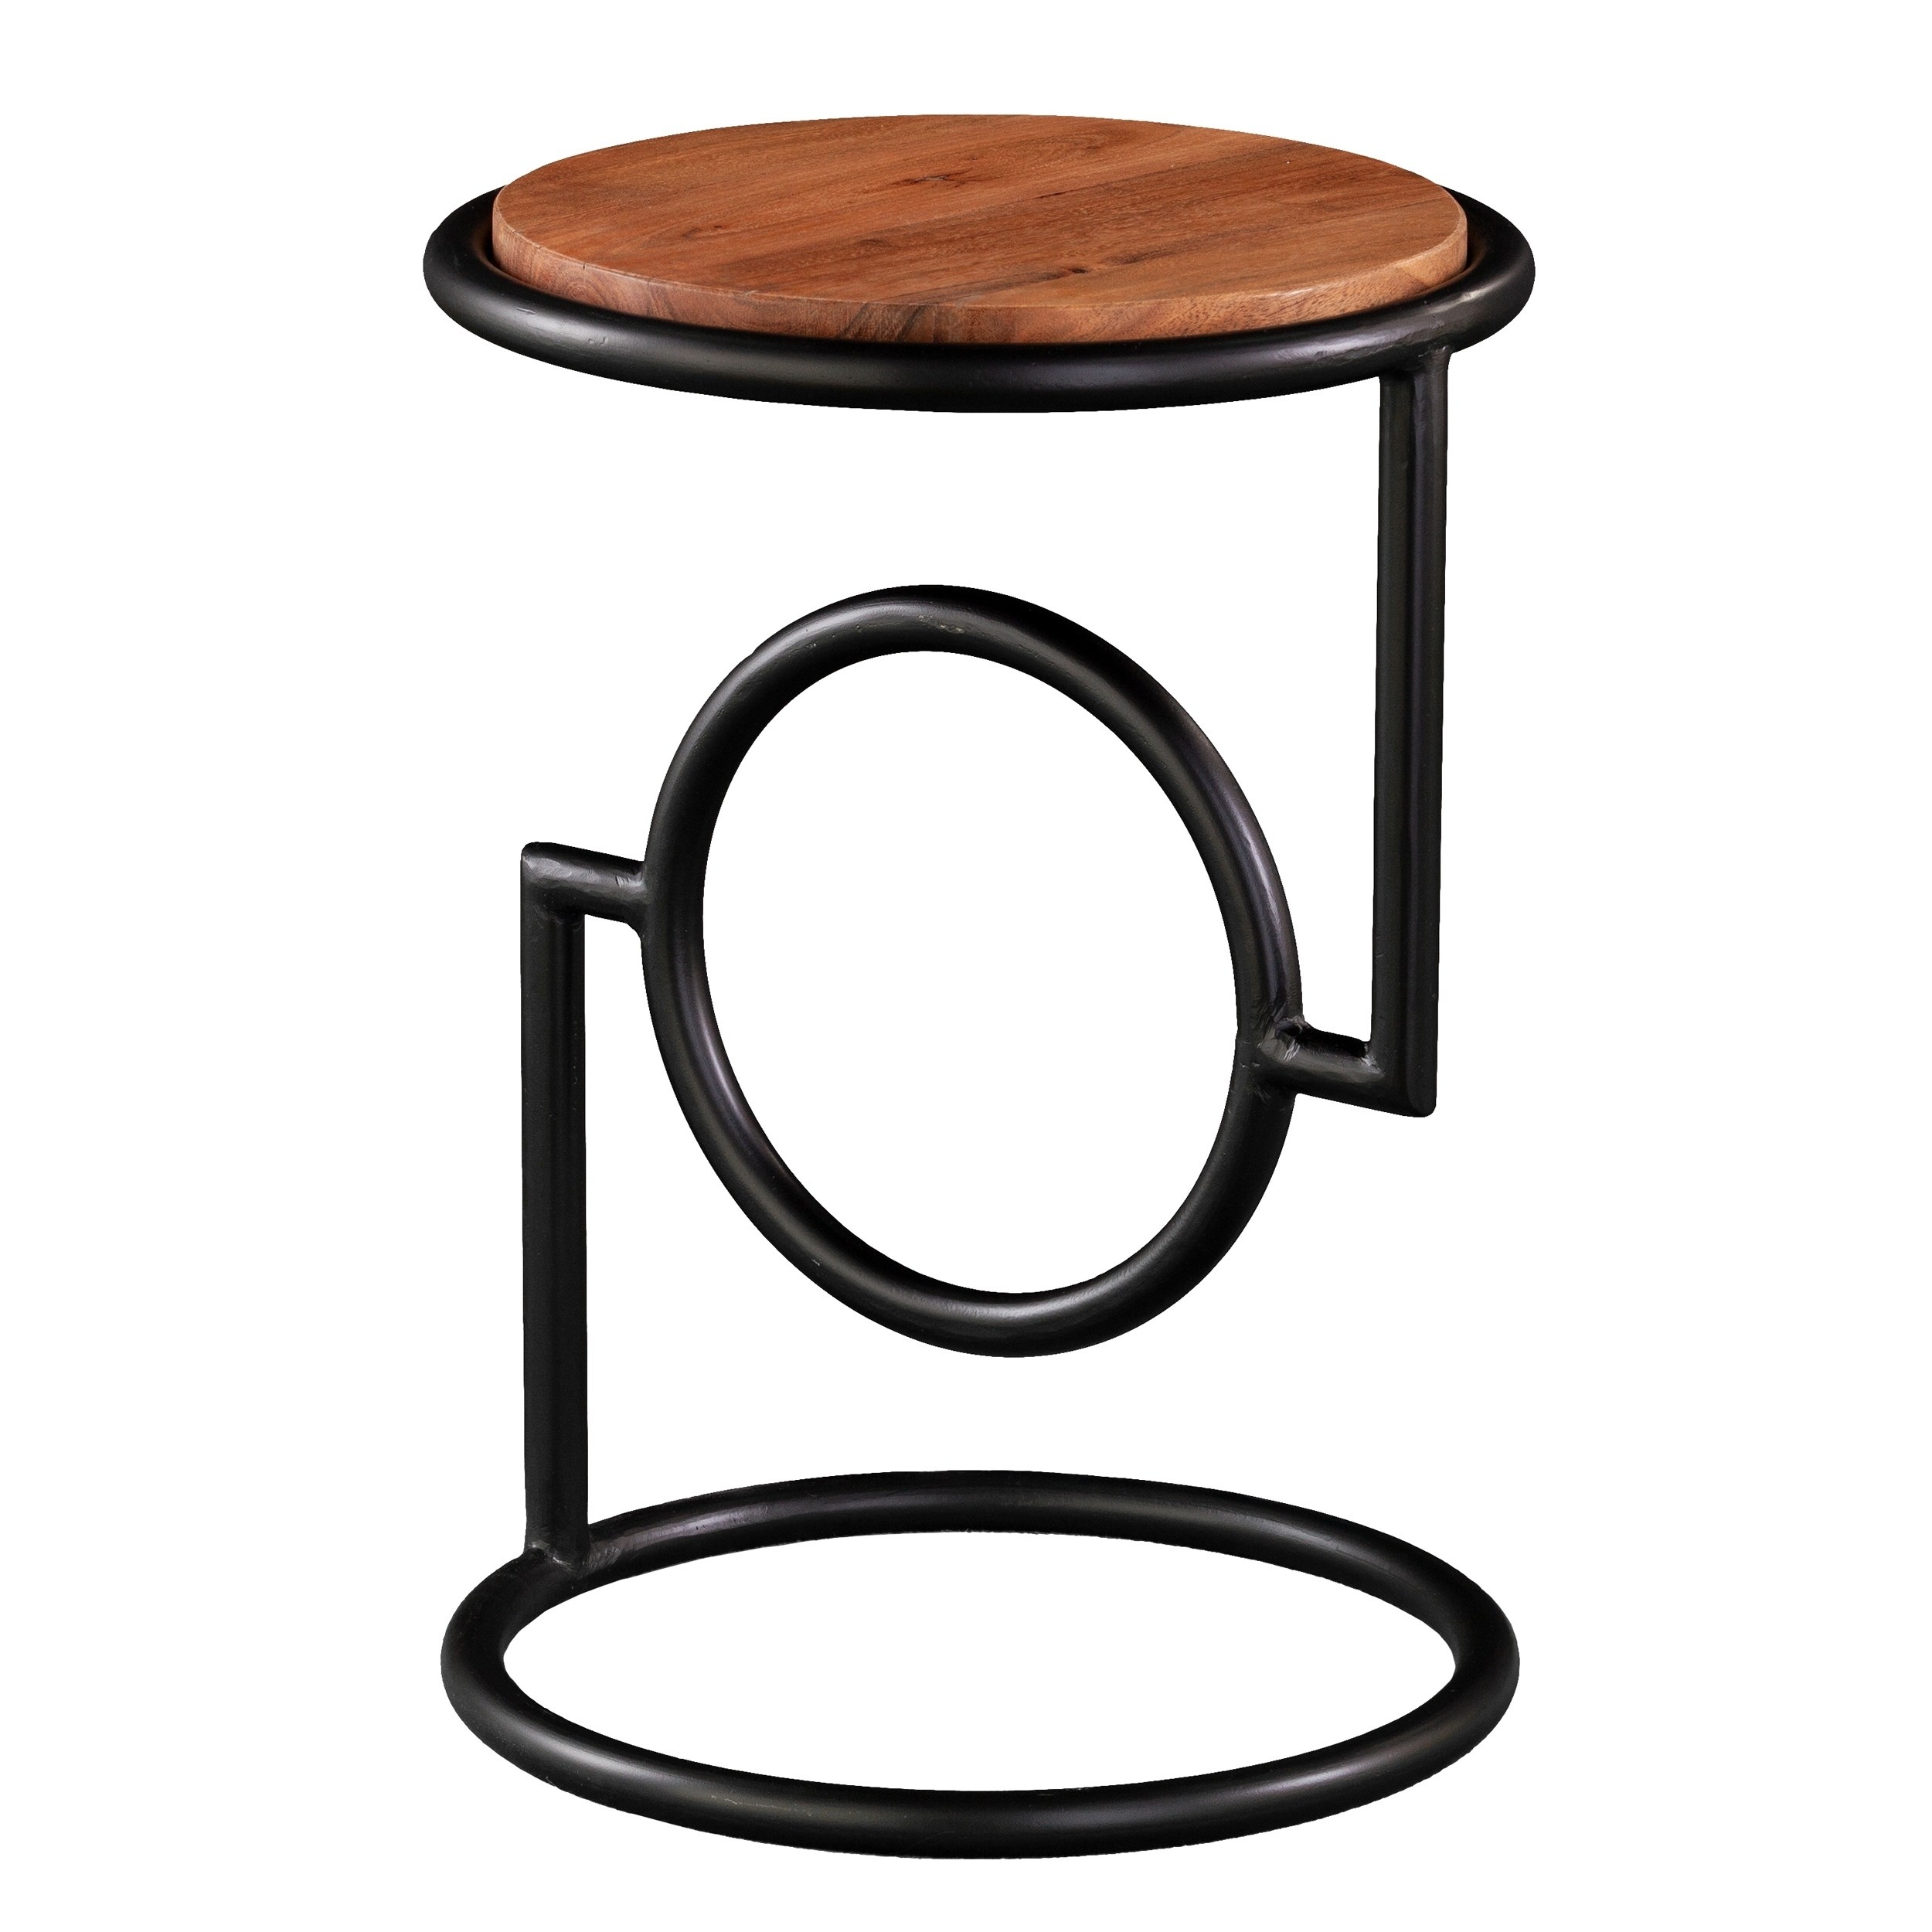 harper blvd bera round accent table mango wood top free shipping today outside patio mats and coasters iron company adjustable height side drum chairs with back modern crystal